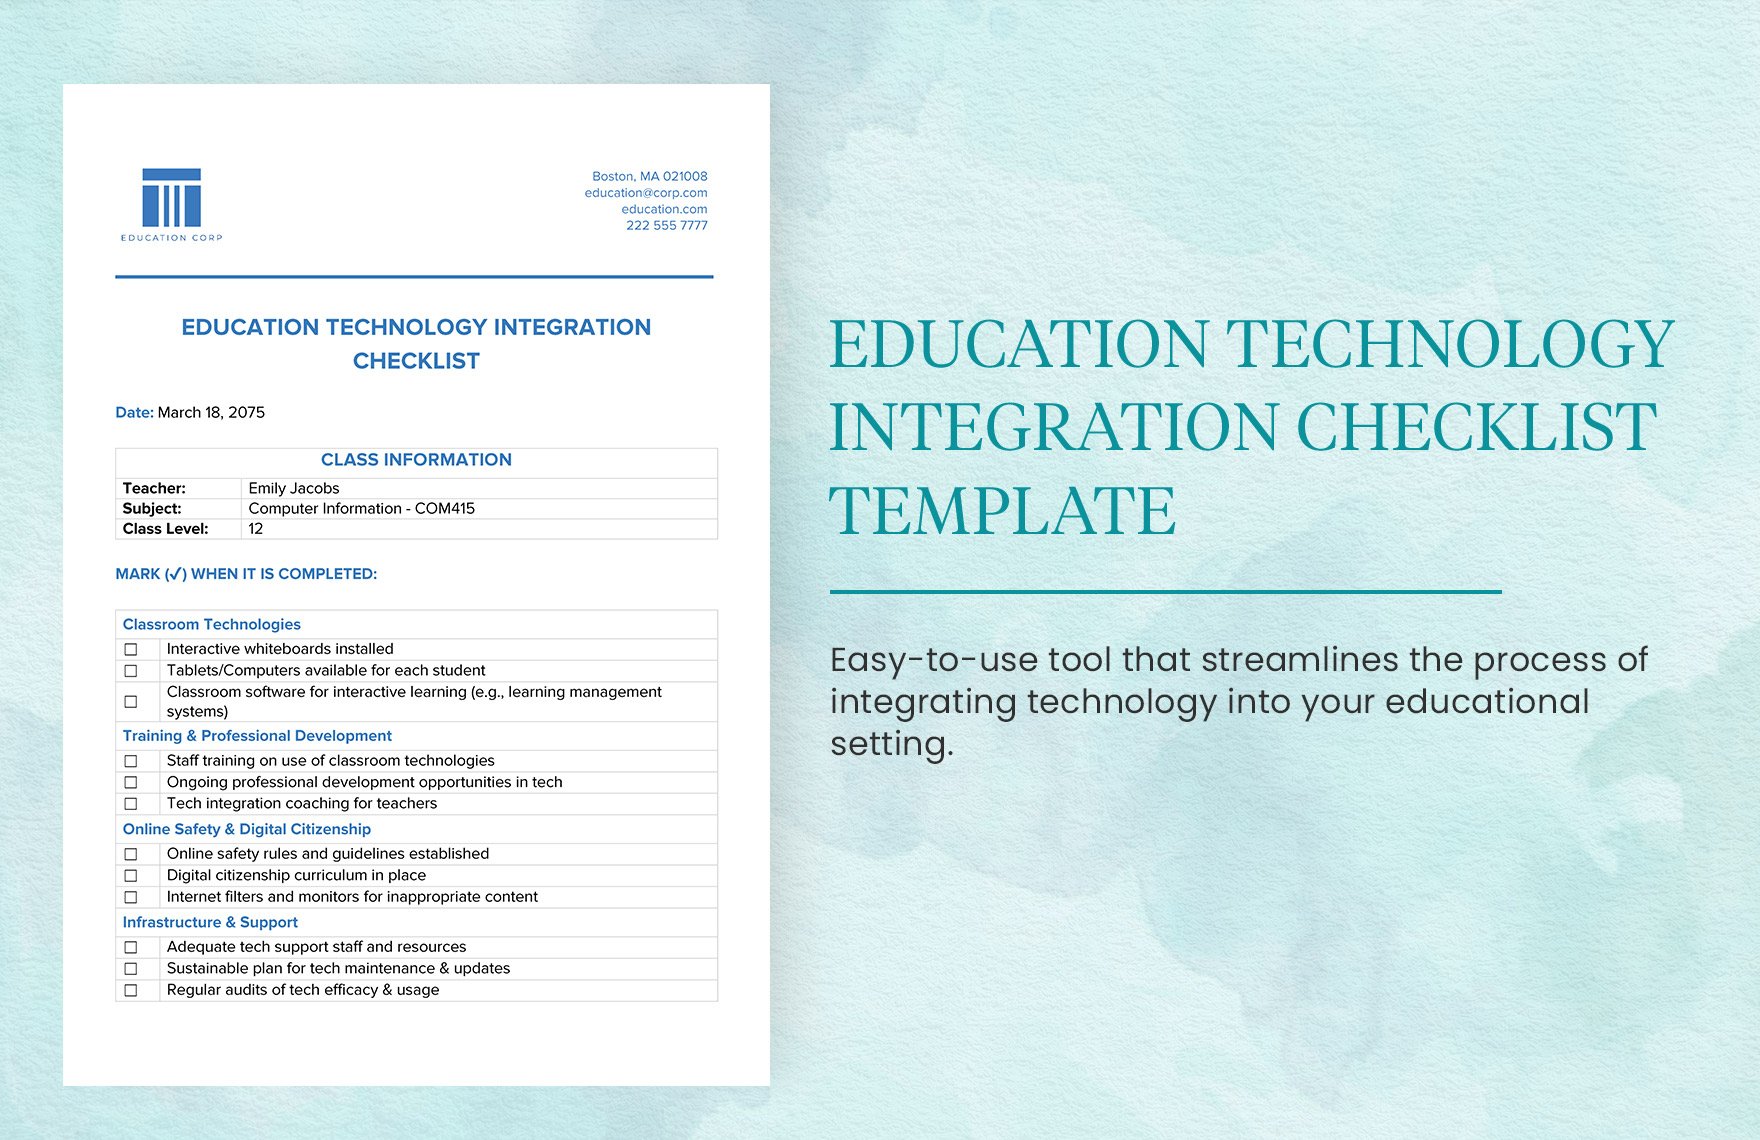 Education Technology Integration Checklist Template in Word, Google Docs, PDF